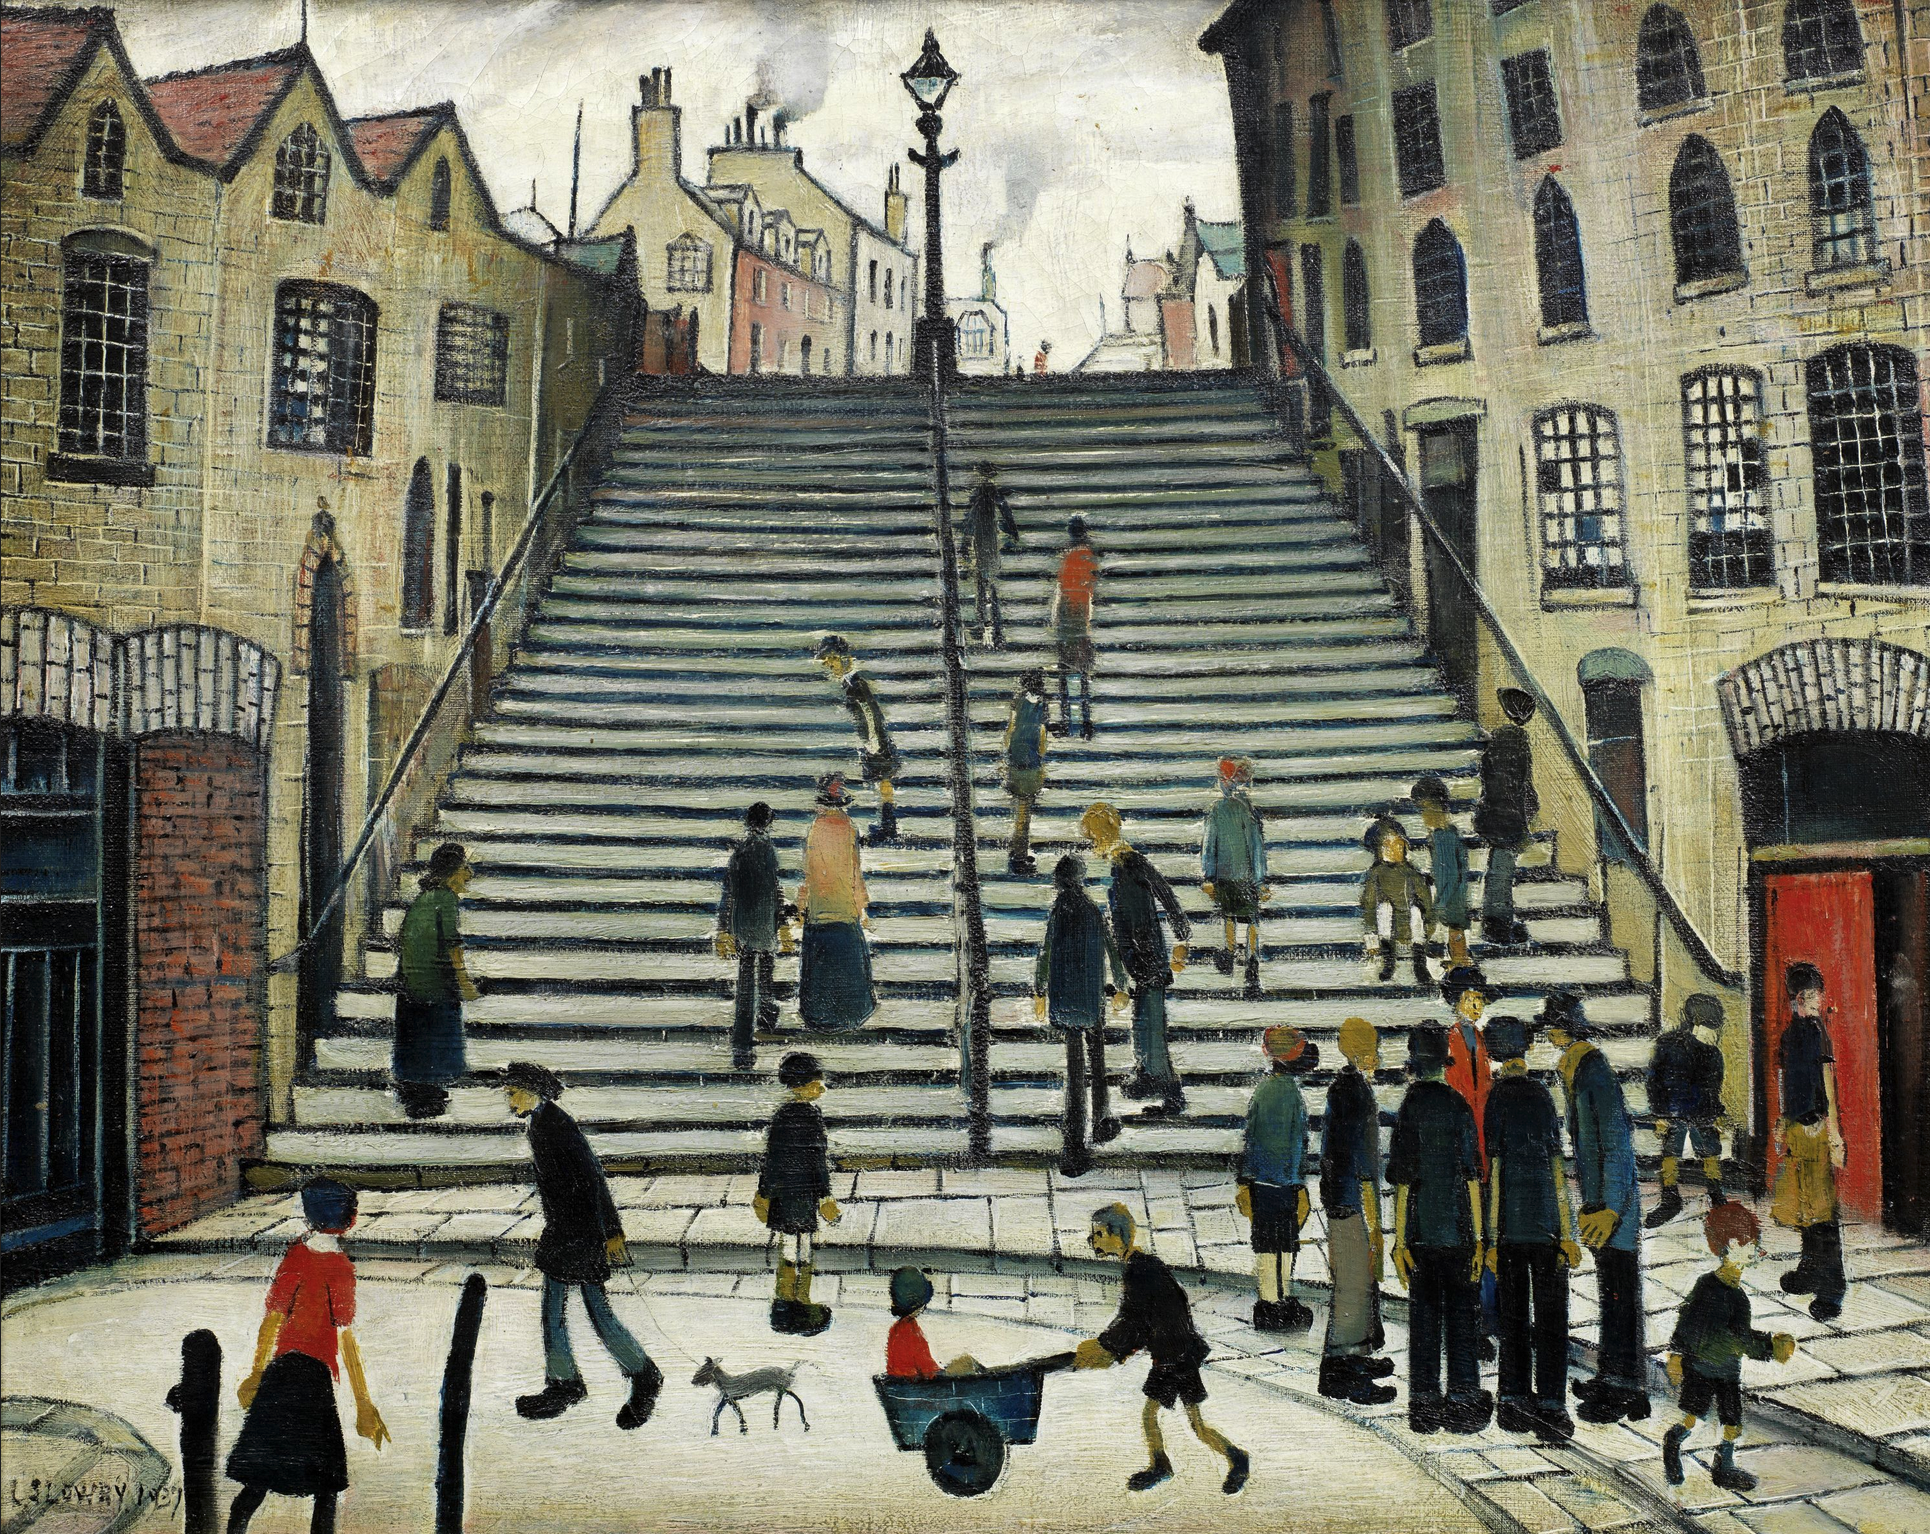 Steps at Wick (1937) by Laurence Stephen Lowry (1887 - 1976), English artist.